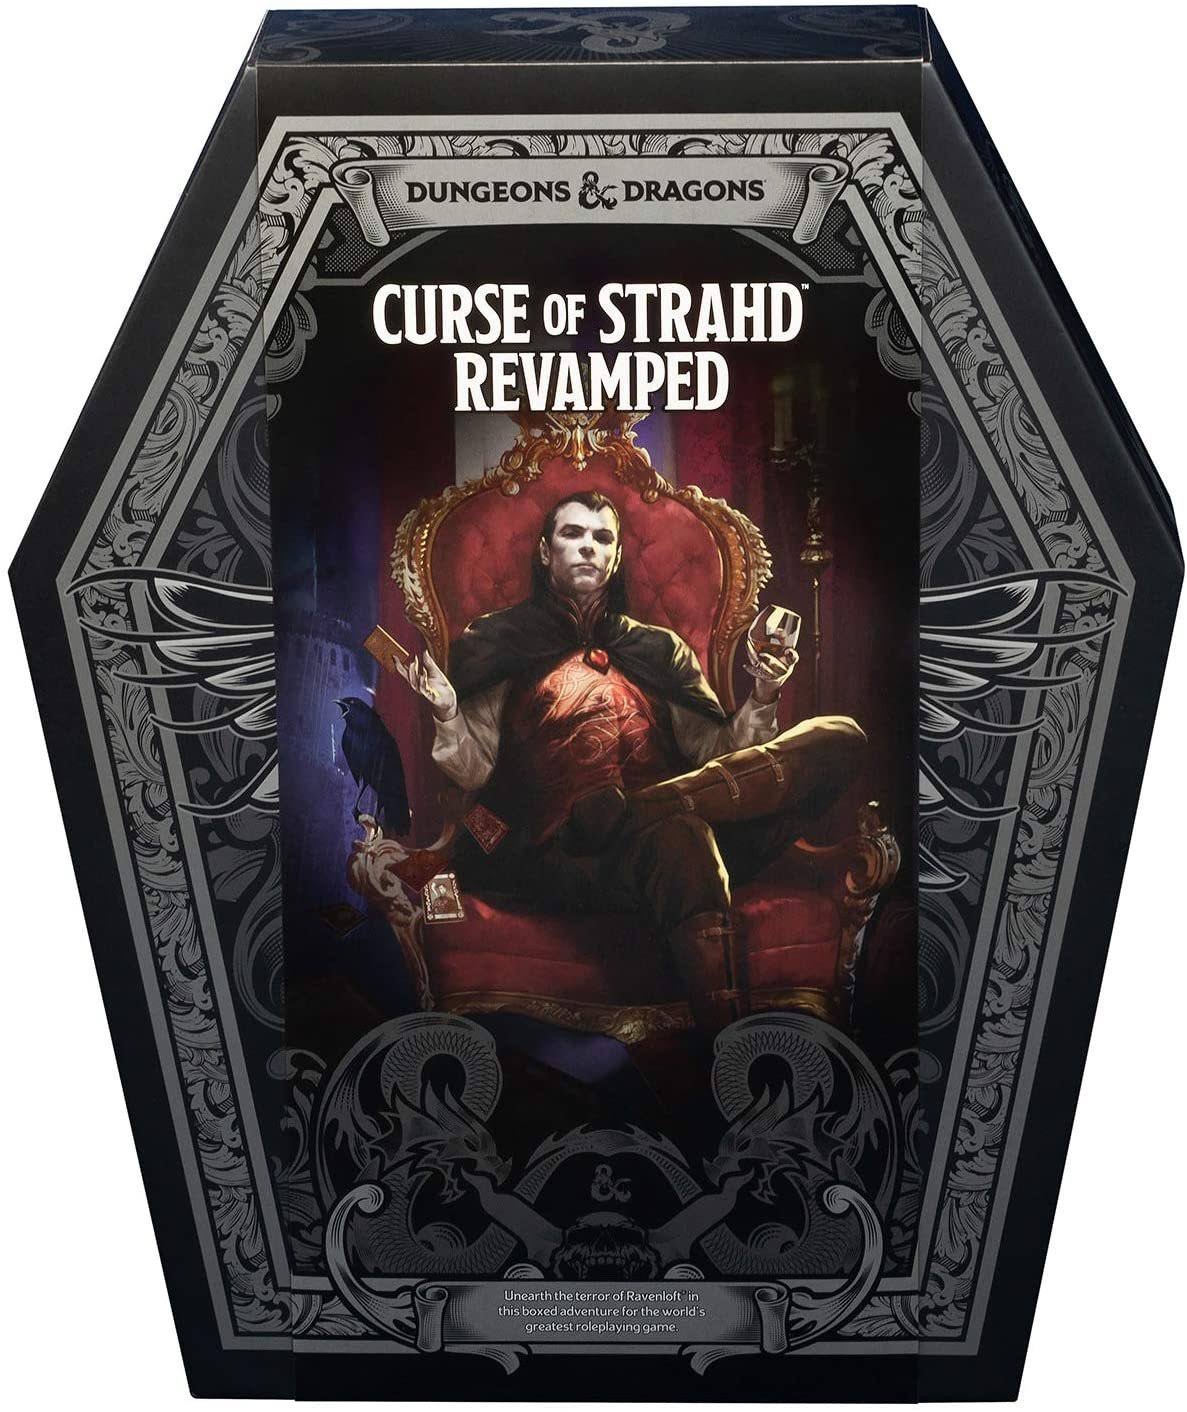 D&D Dungeons & Dragons Curse of Strahd Revamped